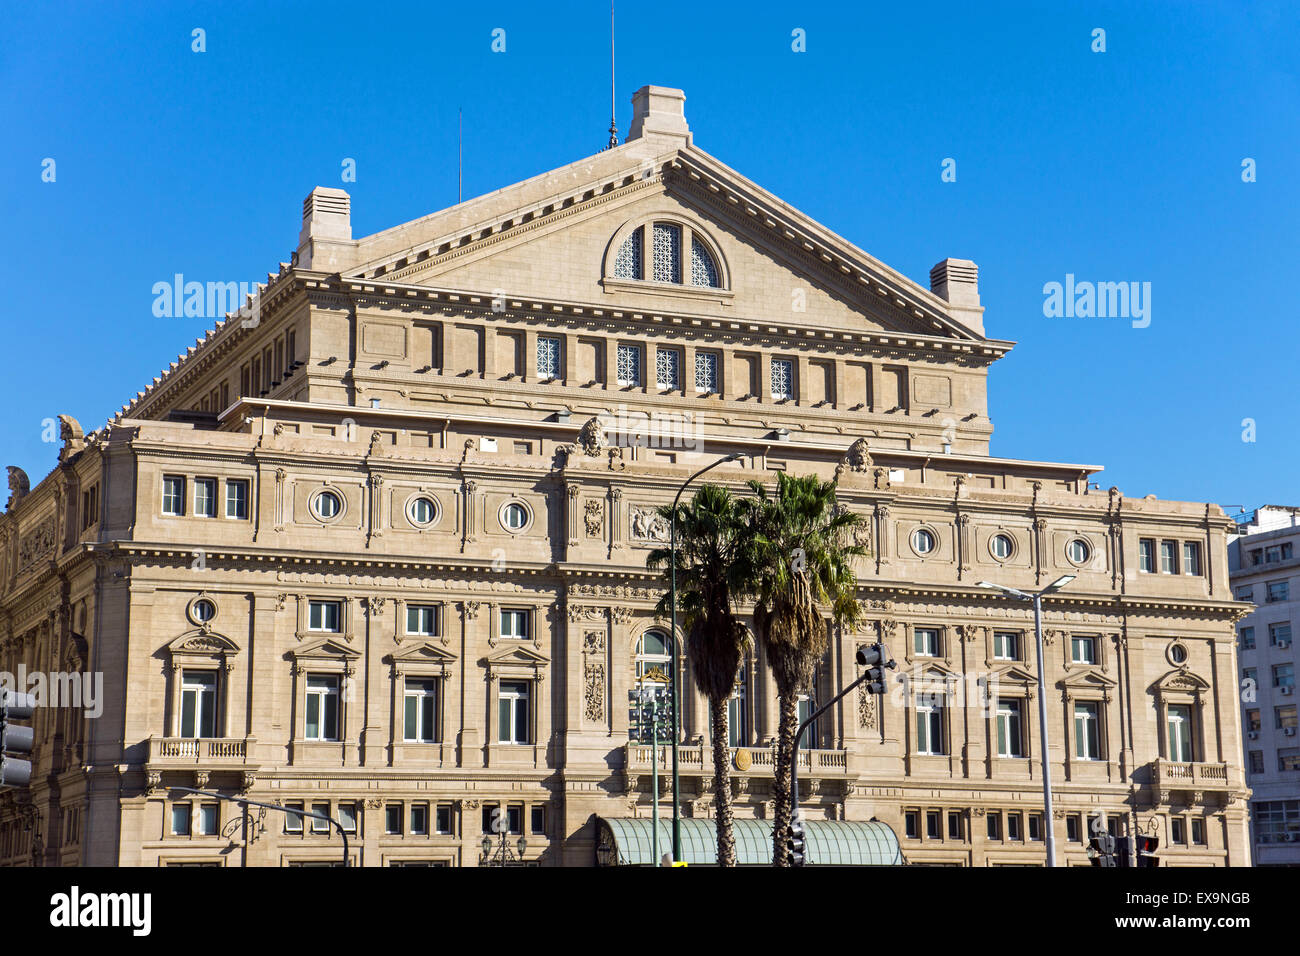 The famous Teatro Colon in Buenos Aires, Argentina Stock Photo